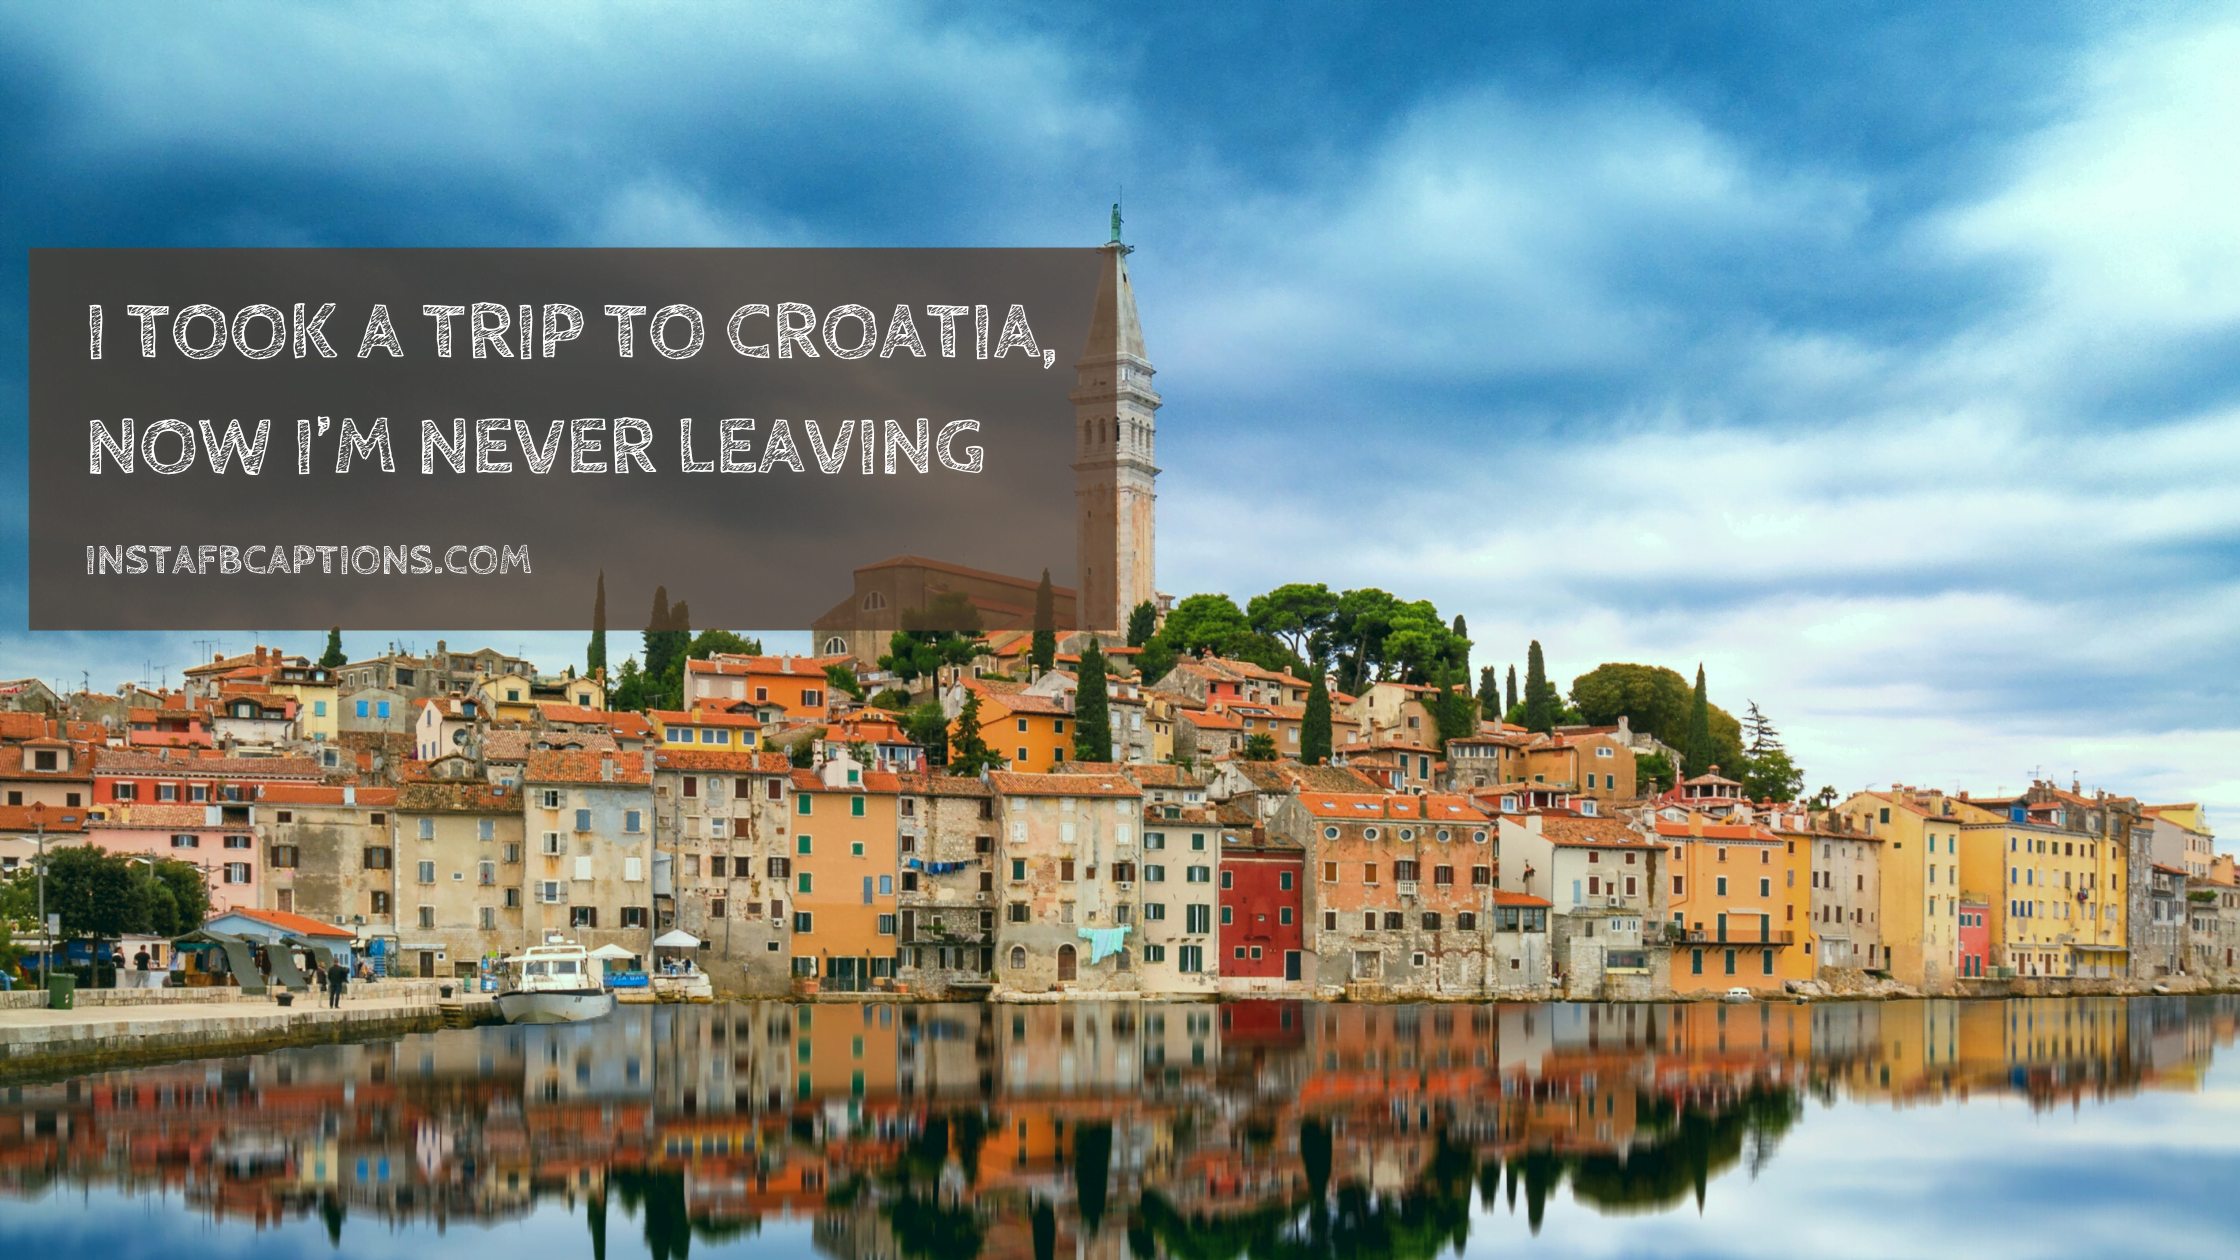 Cute Croatia Captions  - Cute Croatia Captions  - Croatia 2023: Picture Perfect Captions for Instagram